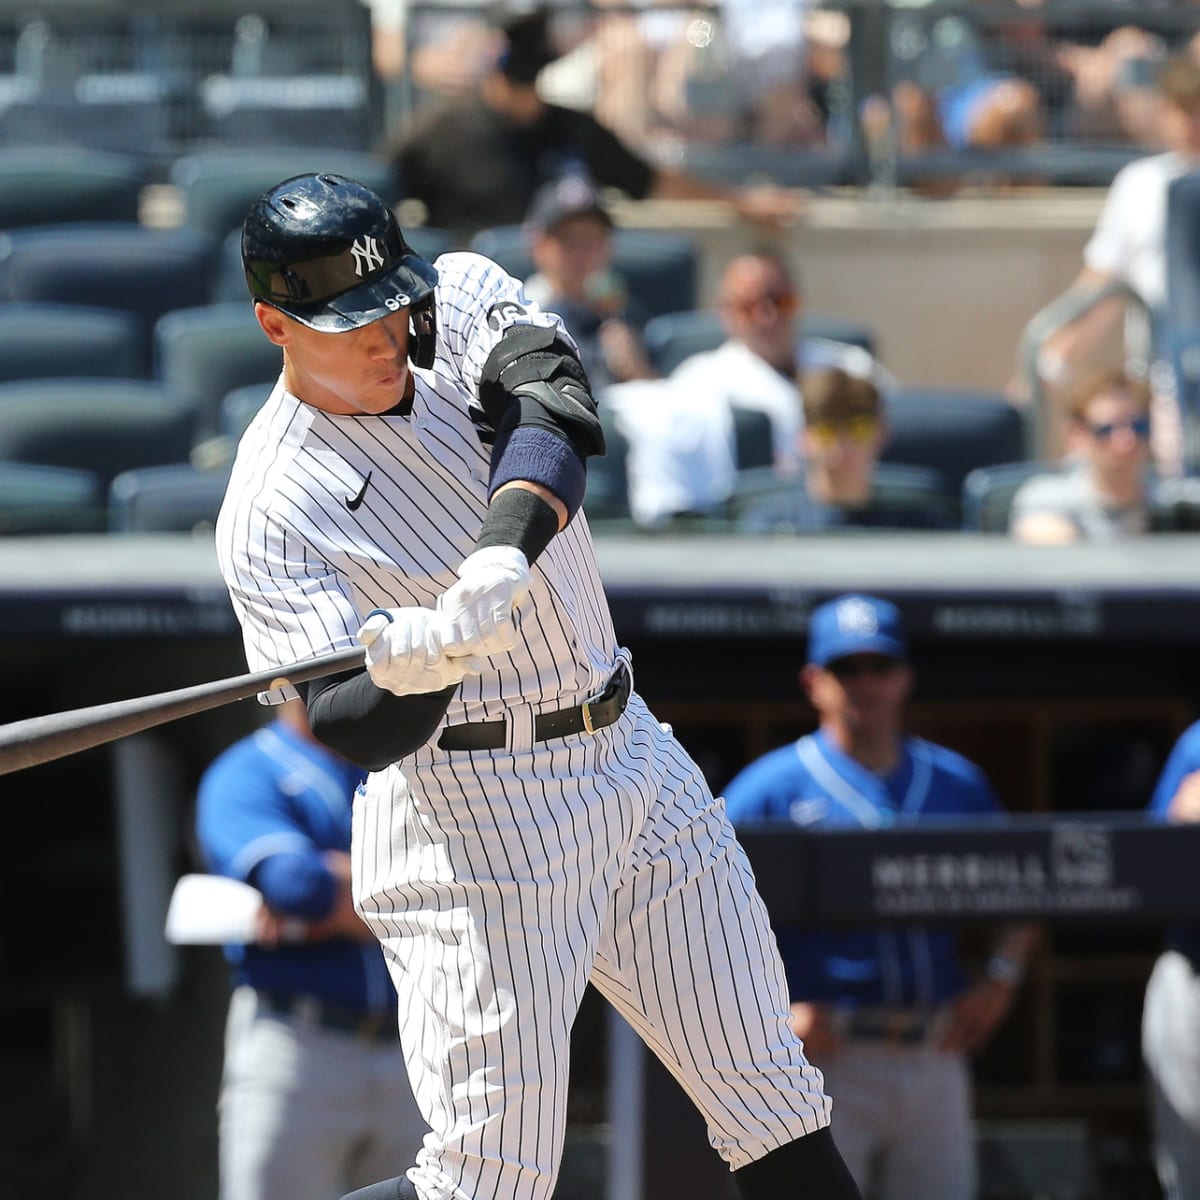 Aaron Judge is back from slump, giving Yankees fearsome October look